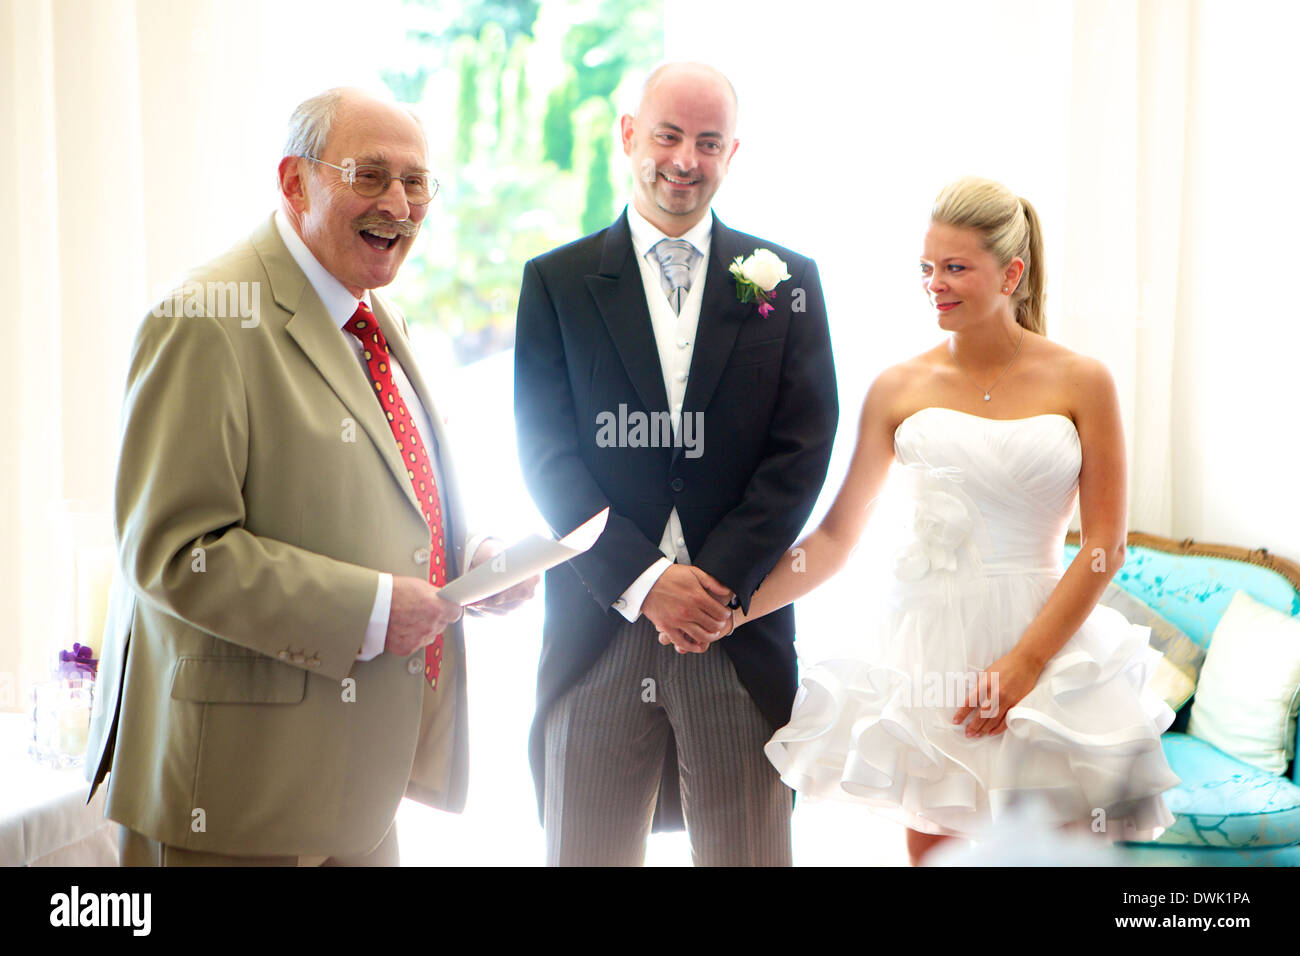 Bride and groom getting married with a registrar in attendance Stock Photo